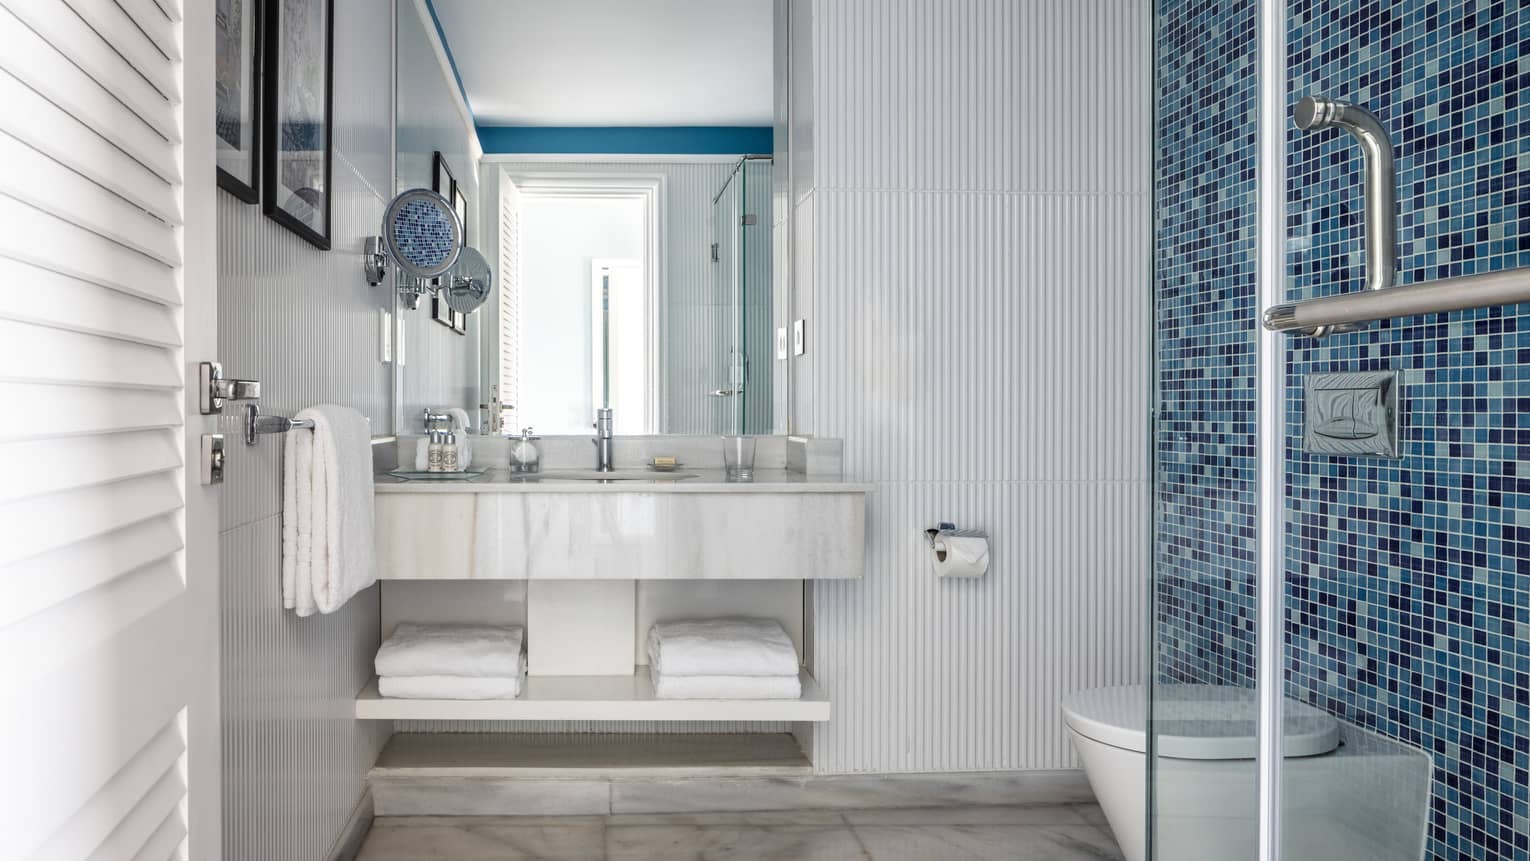 Suite bathroom with walk in shower, blue tiled wall, double vanity, mirror